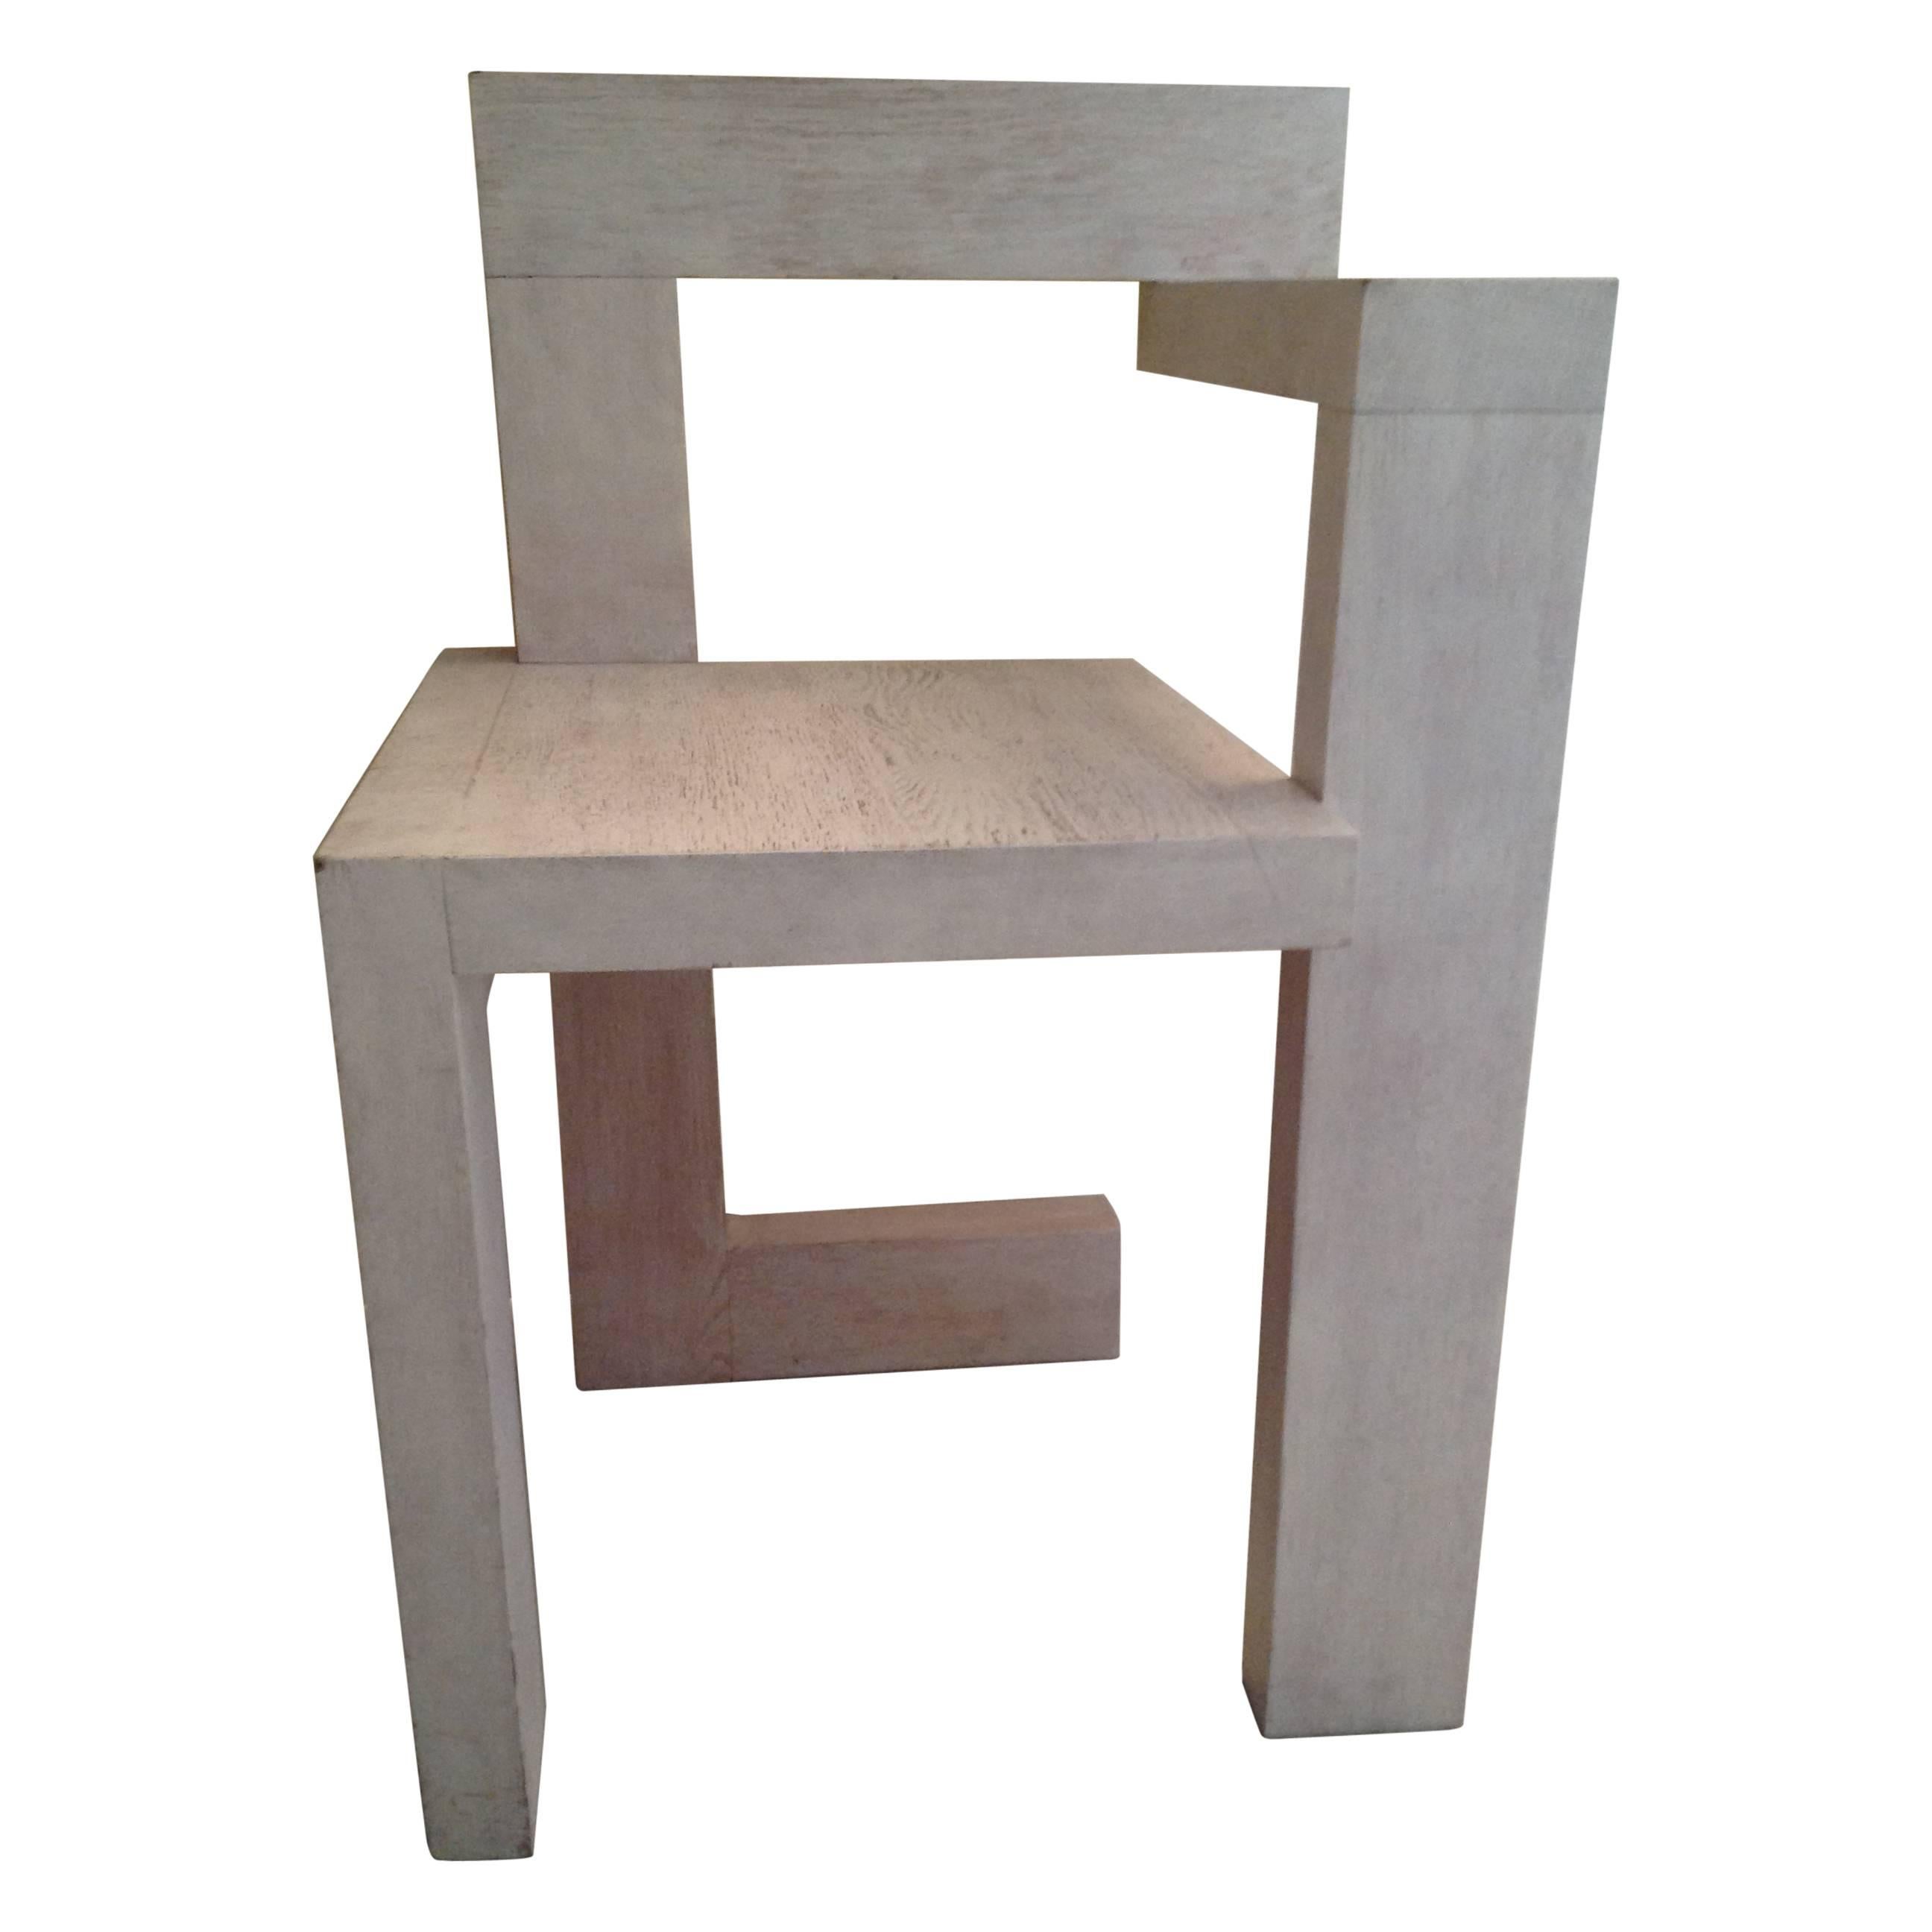 Steltman Chair by Gerrit Rietveld, White Stained Oak, 1963 For Sale